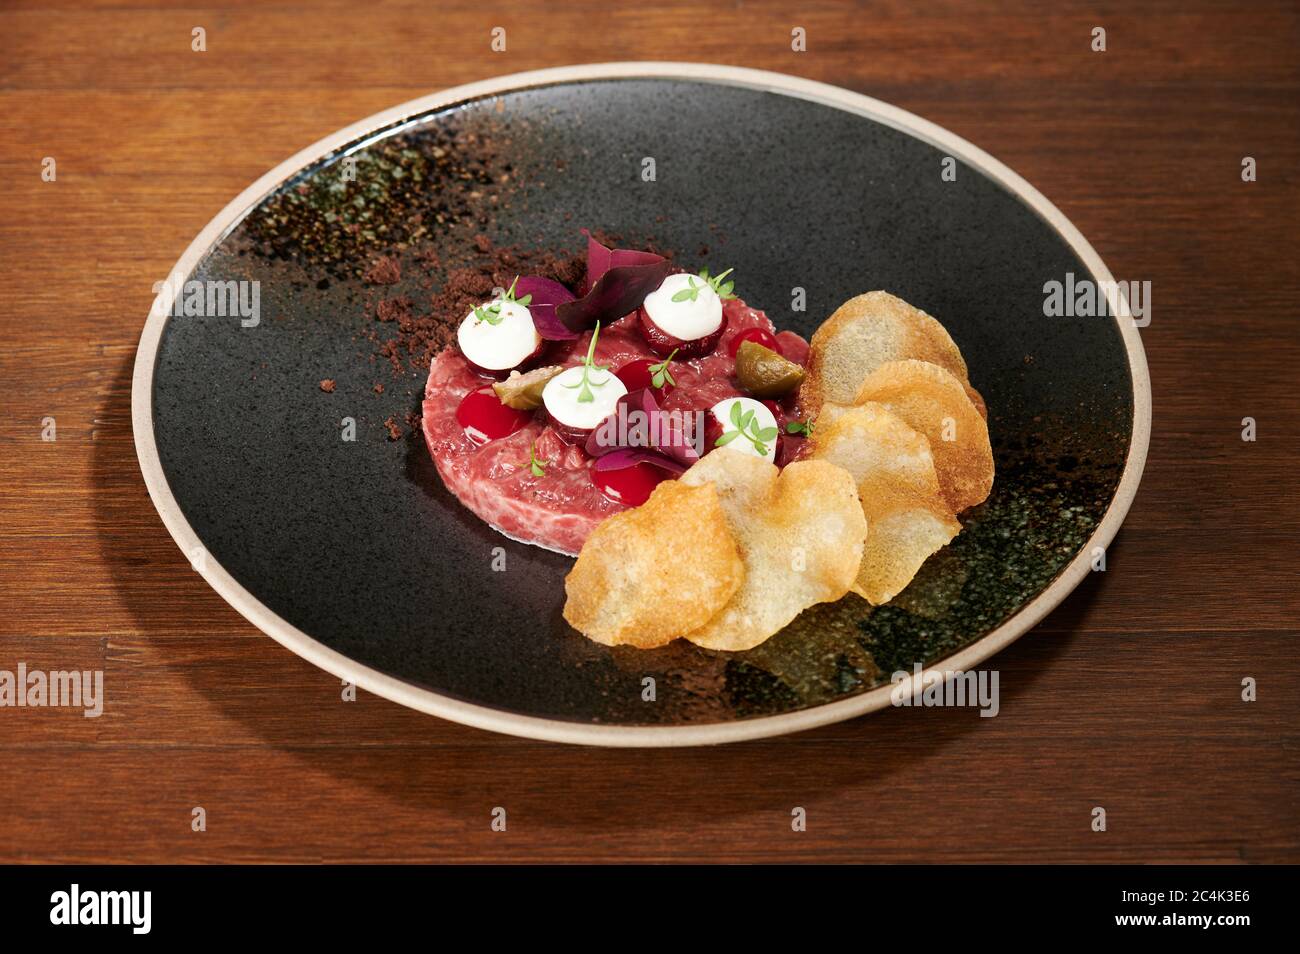 Fresh tartare meal on black grungy plate perspective view in wooden table Stock Photo